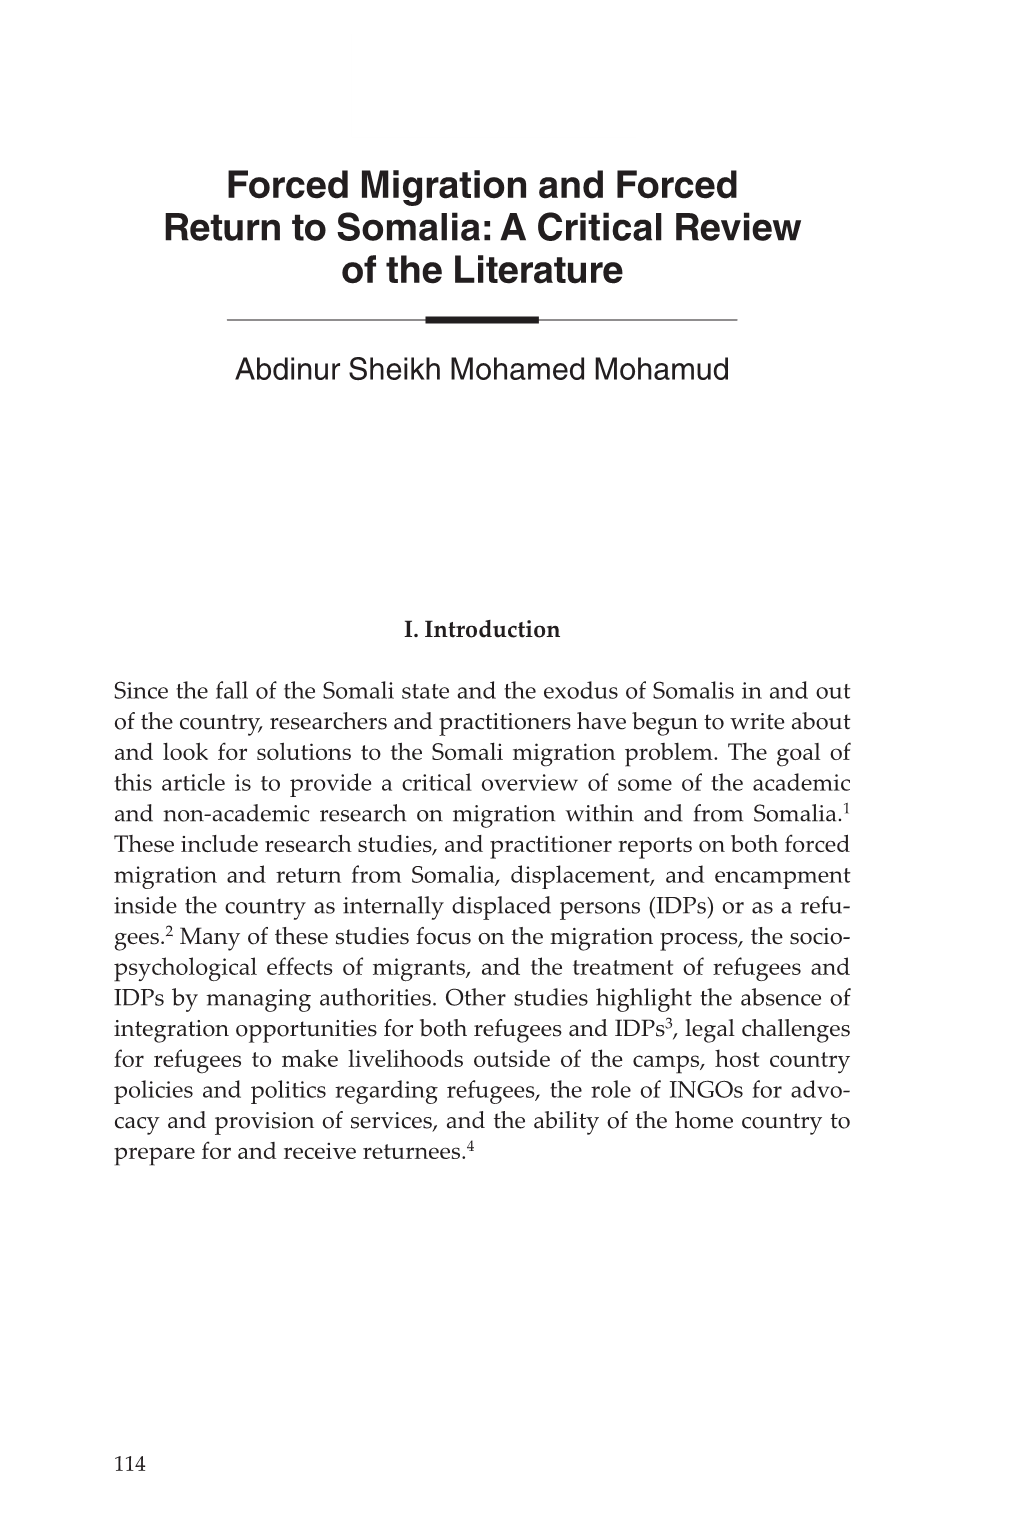 Forced Migration and Forced Return to Somalia: a Critical Review of the Literature